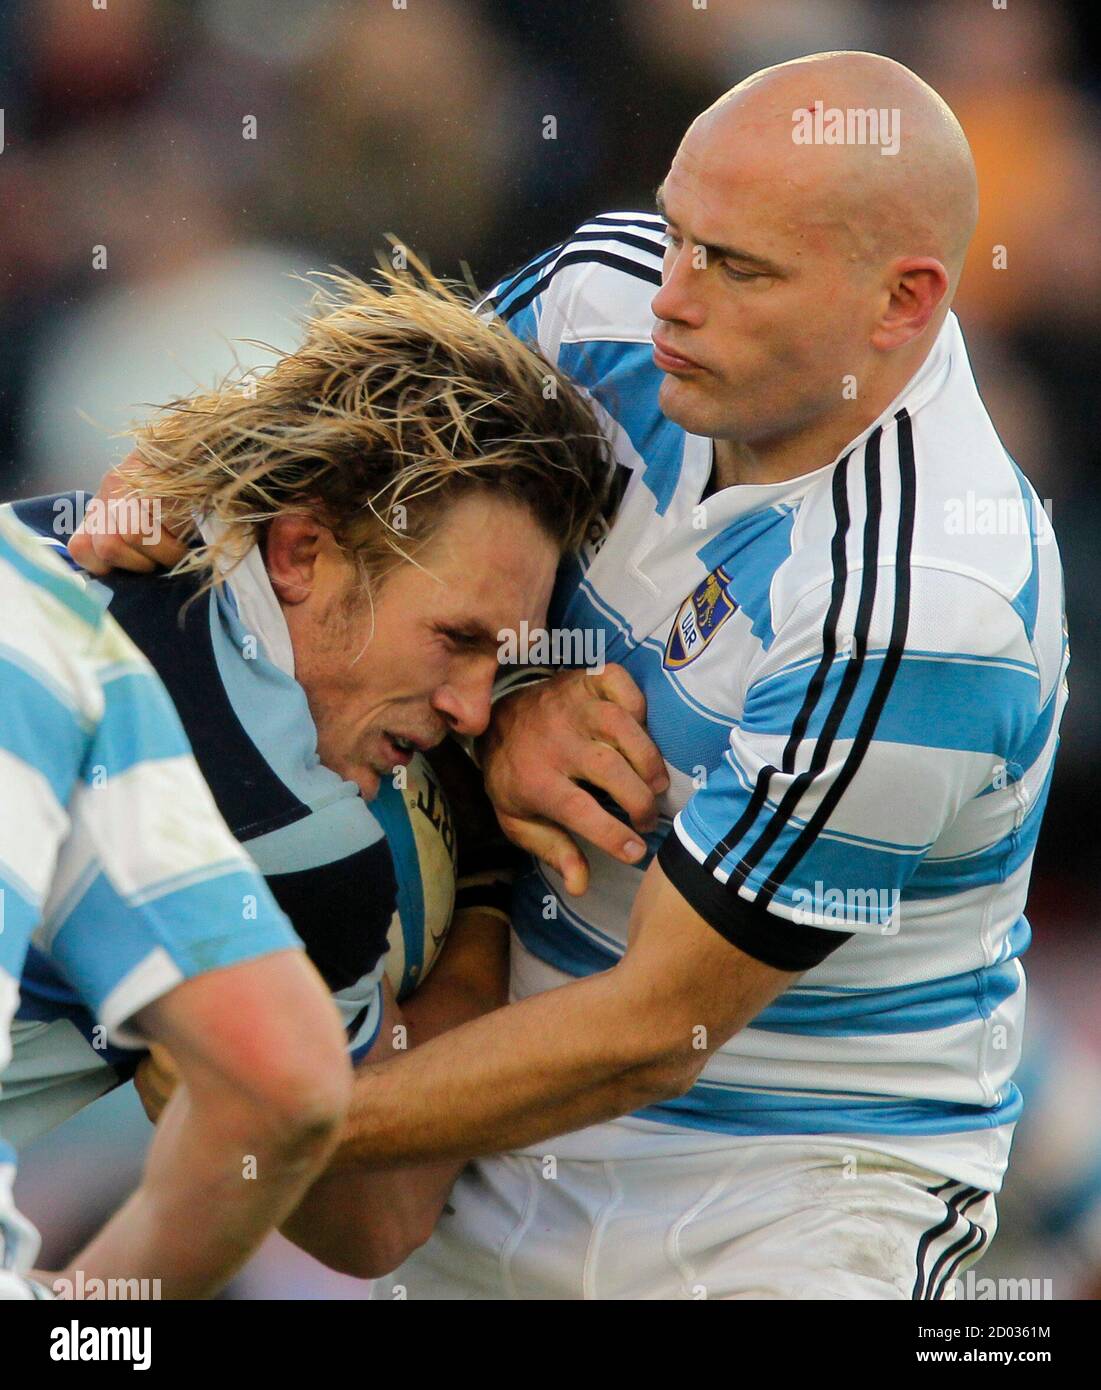 Felipe Contepomi (R) of Argentina's Los Pumas and Gerhard Vosloo of  France's Barbarians battle for the ball during their friendly rugby match  in Buenos Aires June 4, 2011. REUTERS/Enrique Marcarian (ARGENTINA -